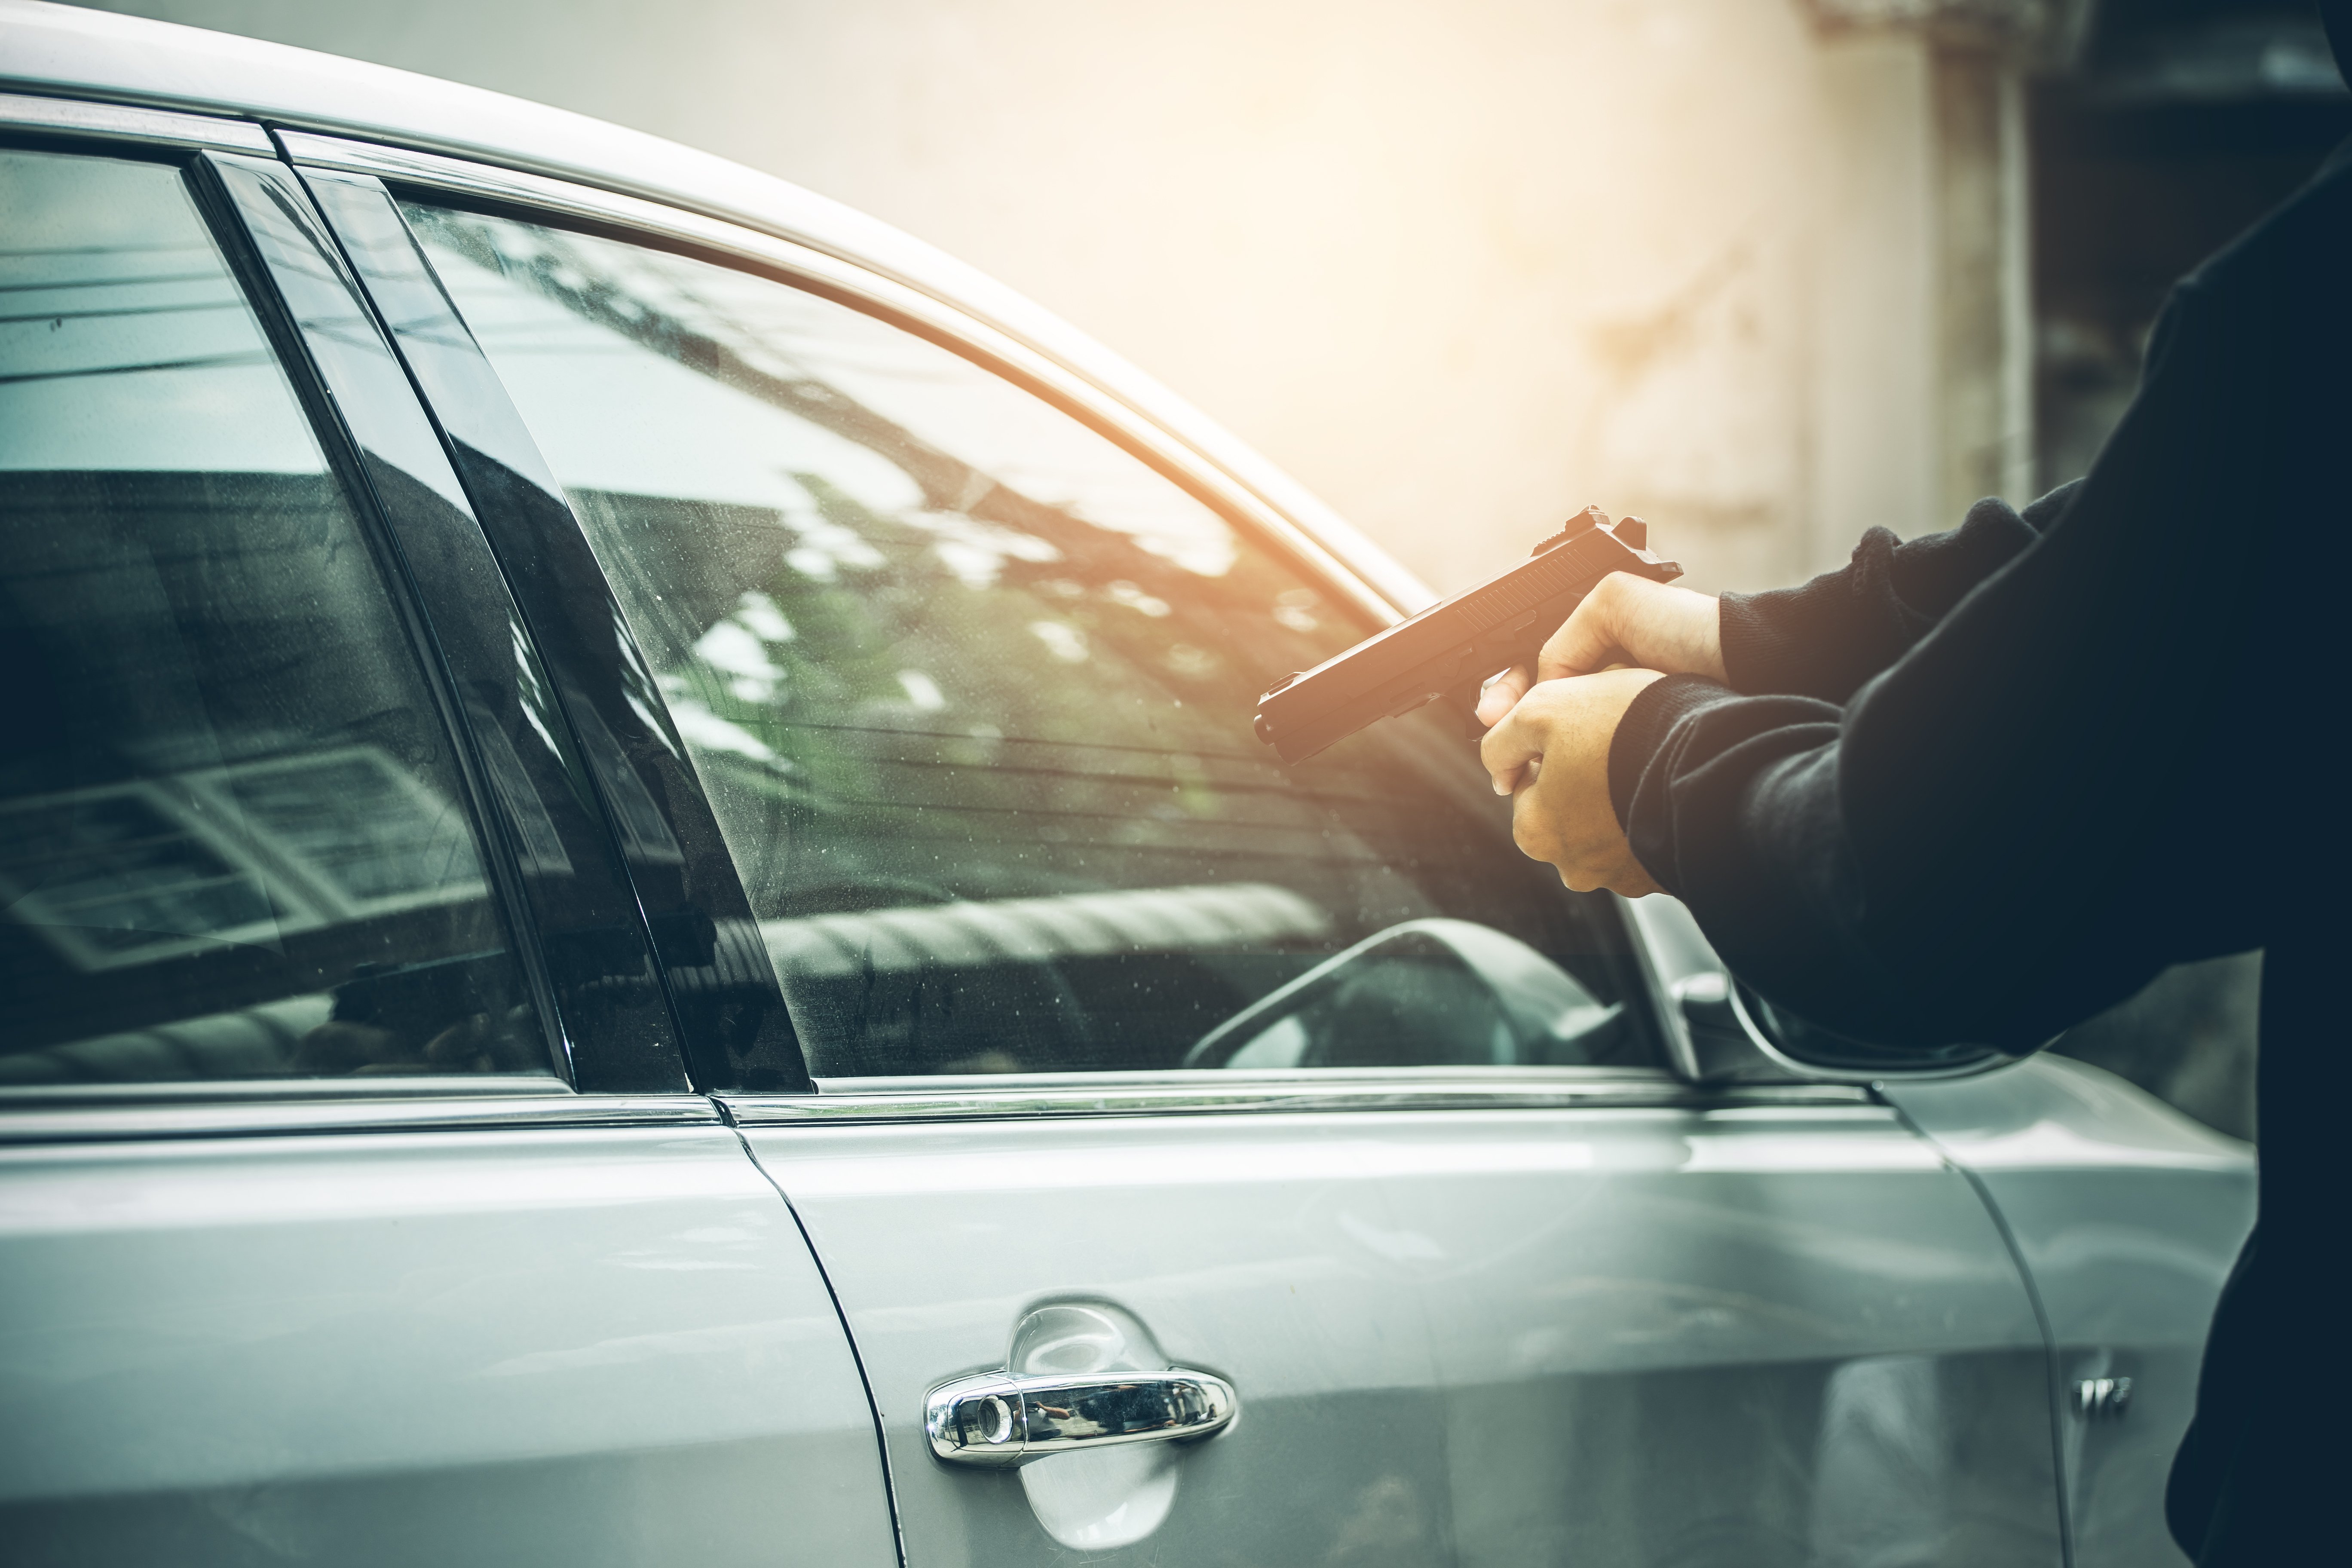 A car hijacking took place on Jan 7th, 2021 in Alabama. | Photo: Shutterstock